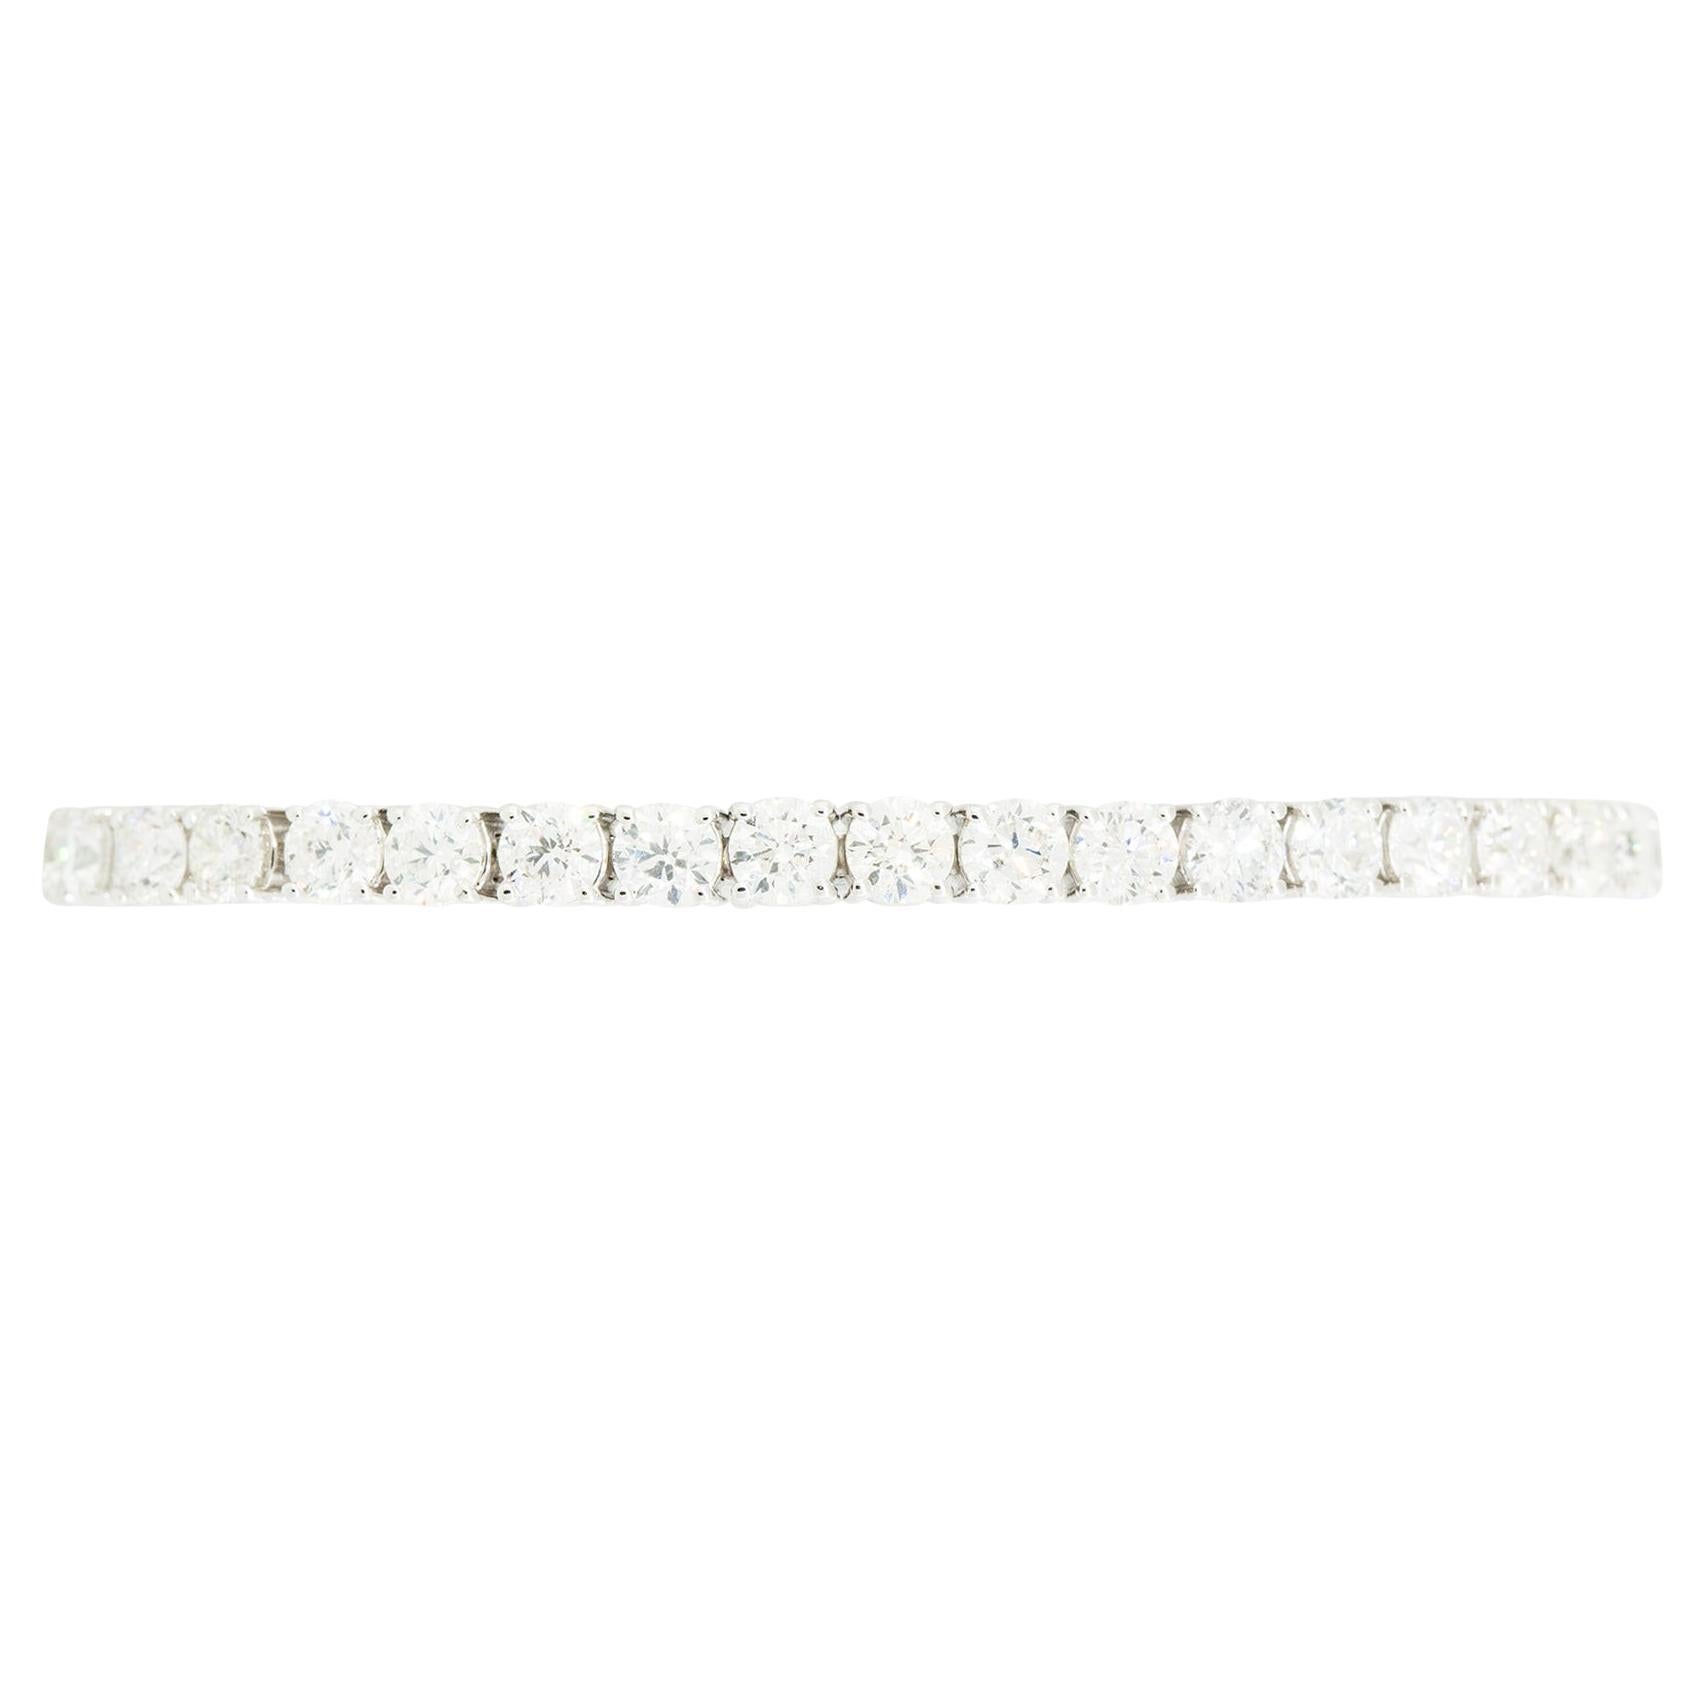 Material: 18k White Gold
Diamond Details: Approx. 15.0ctw of Round Brilliant Cut Diamonds. Diamonds are H/I in color and SI in clarity. There are 37 Diamonds in total
Clasps: Tongue in Box Clasp
Total Weight: Unknown
Length: 7